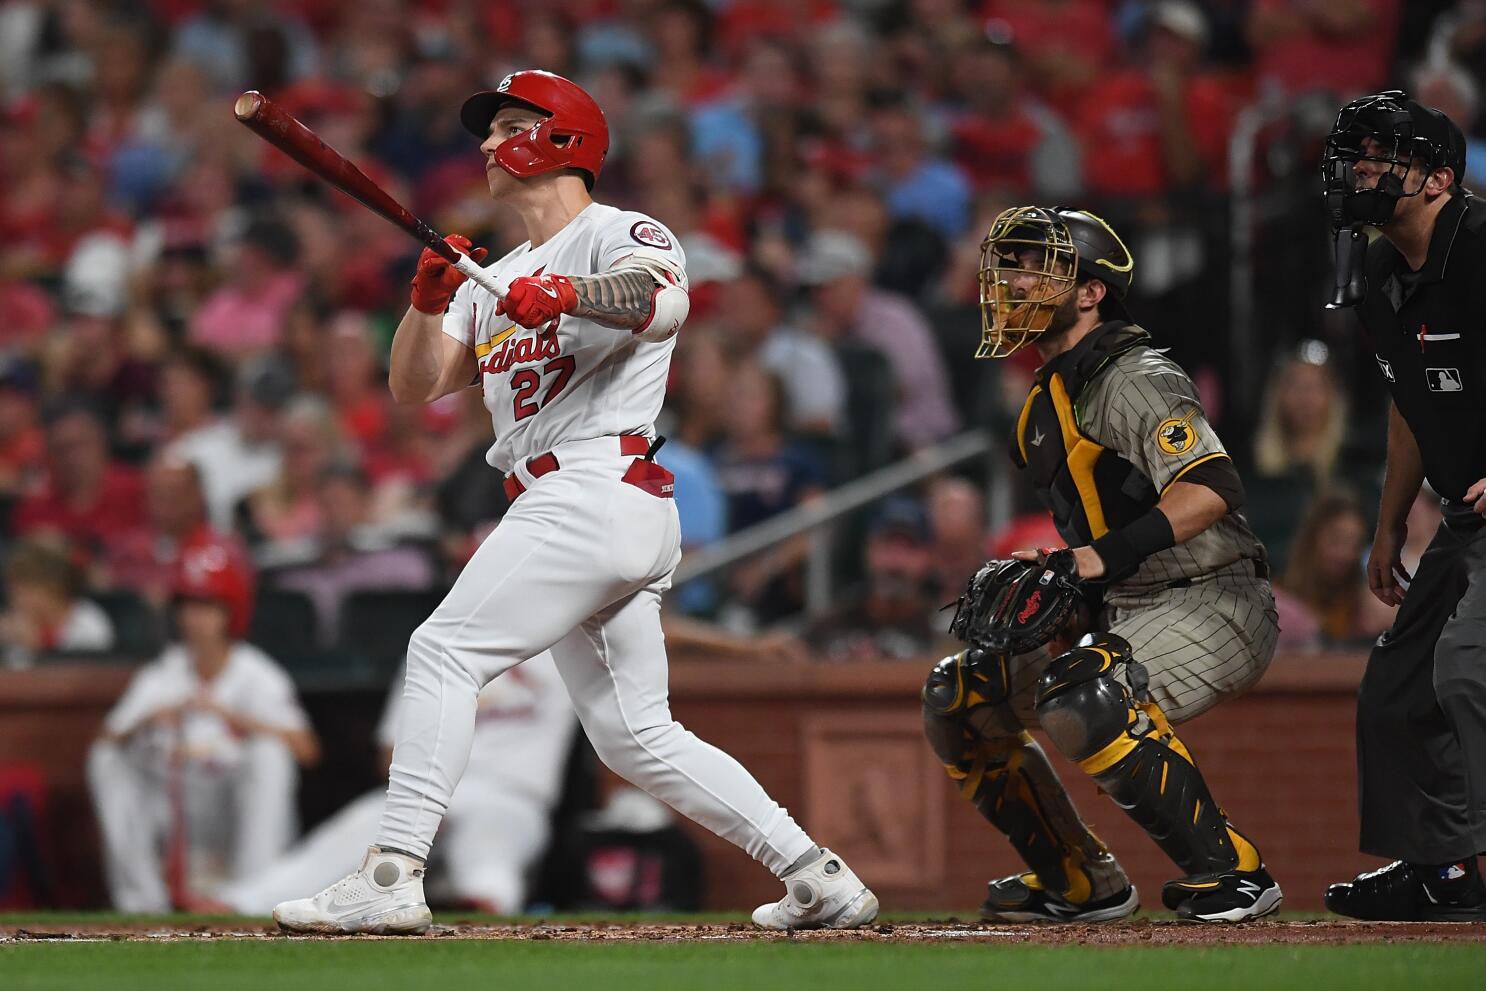 The St. Louis Cardinals face a San Diego Padres team fighting for